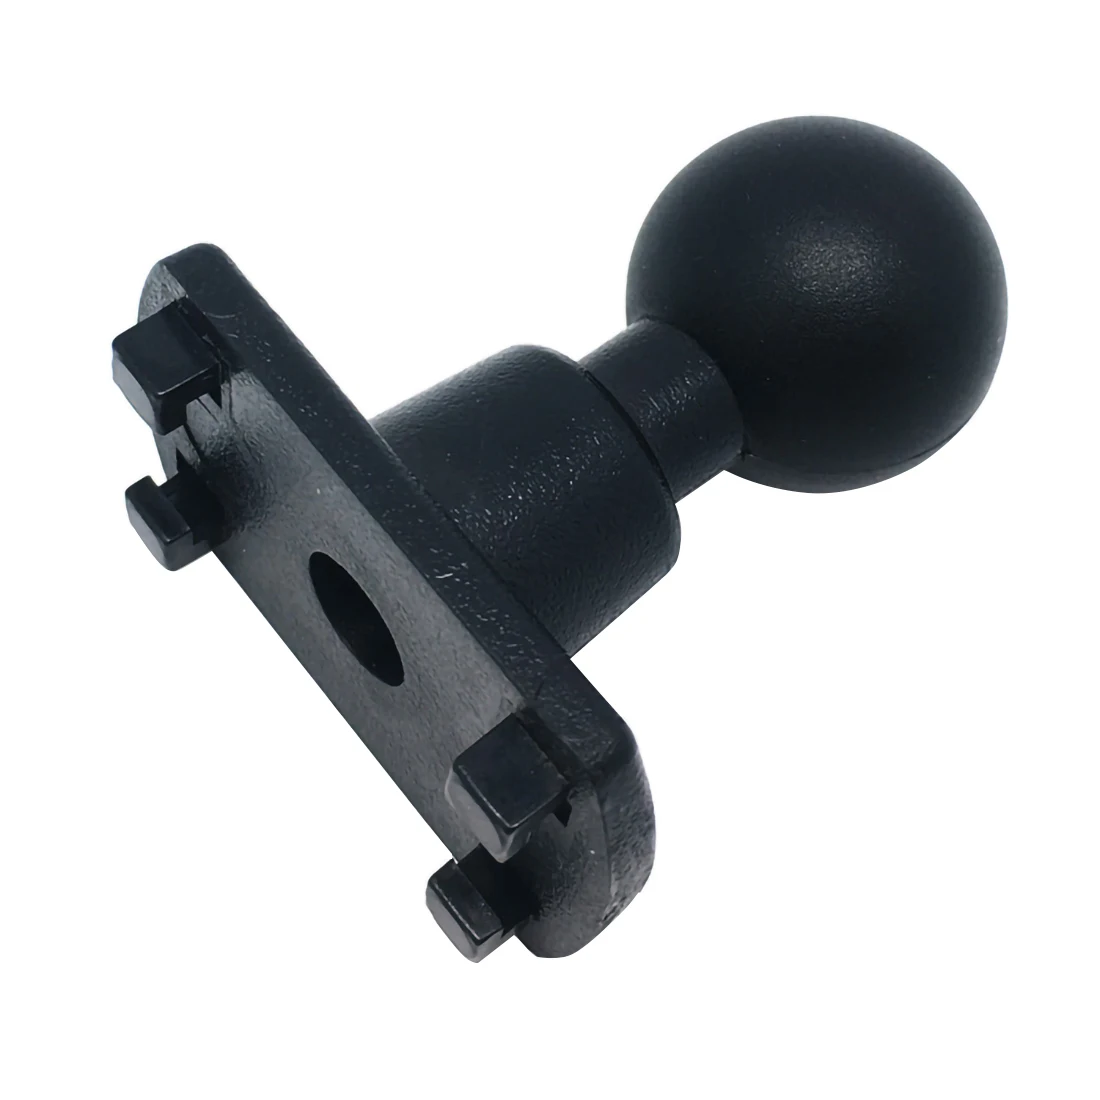 4 Hole Claws AMPS Adaptor Plate with 1 inch( 25mm) Rubber Ball compatible for Ram Mounts for Cameras for Garmin GPS DVR